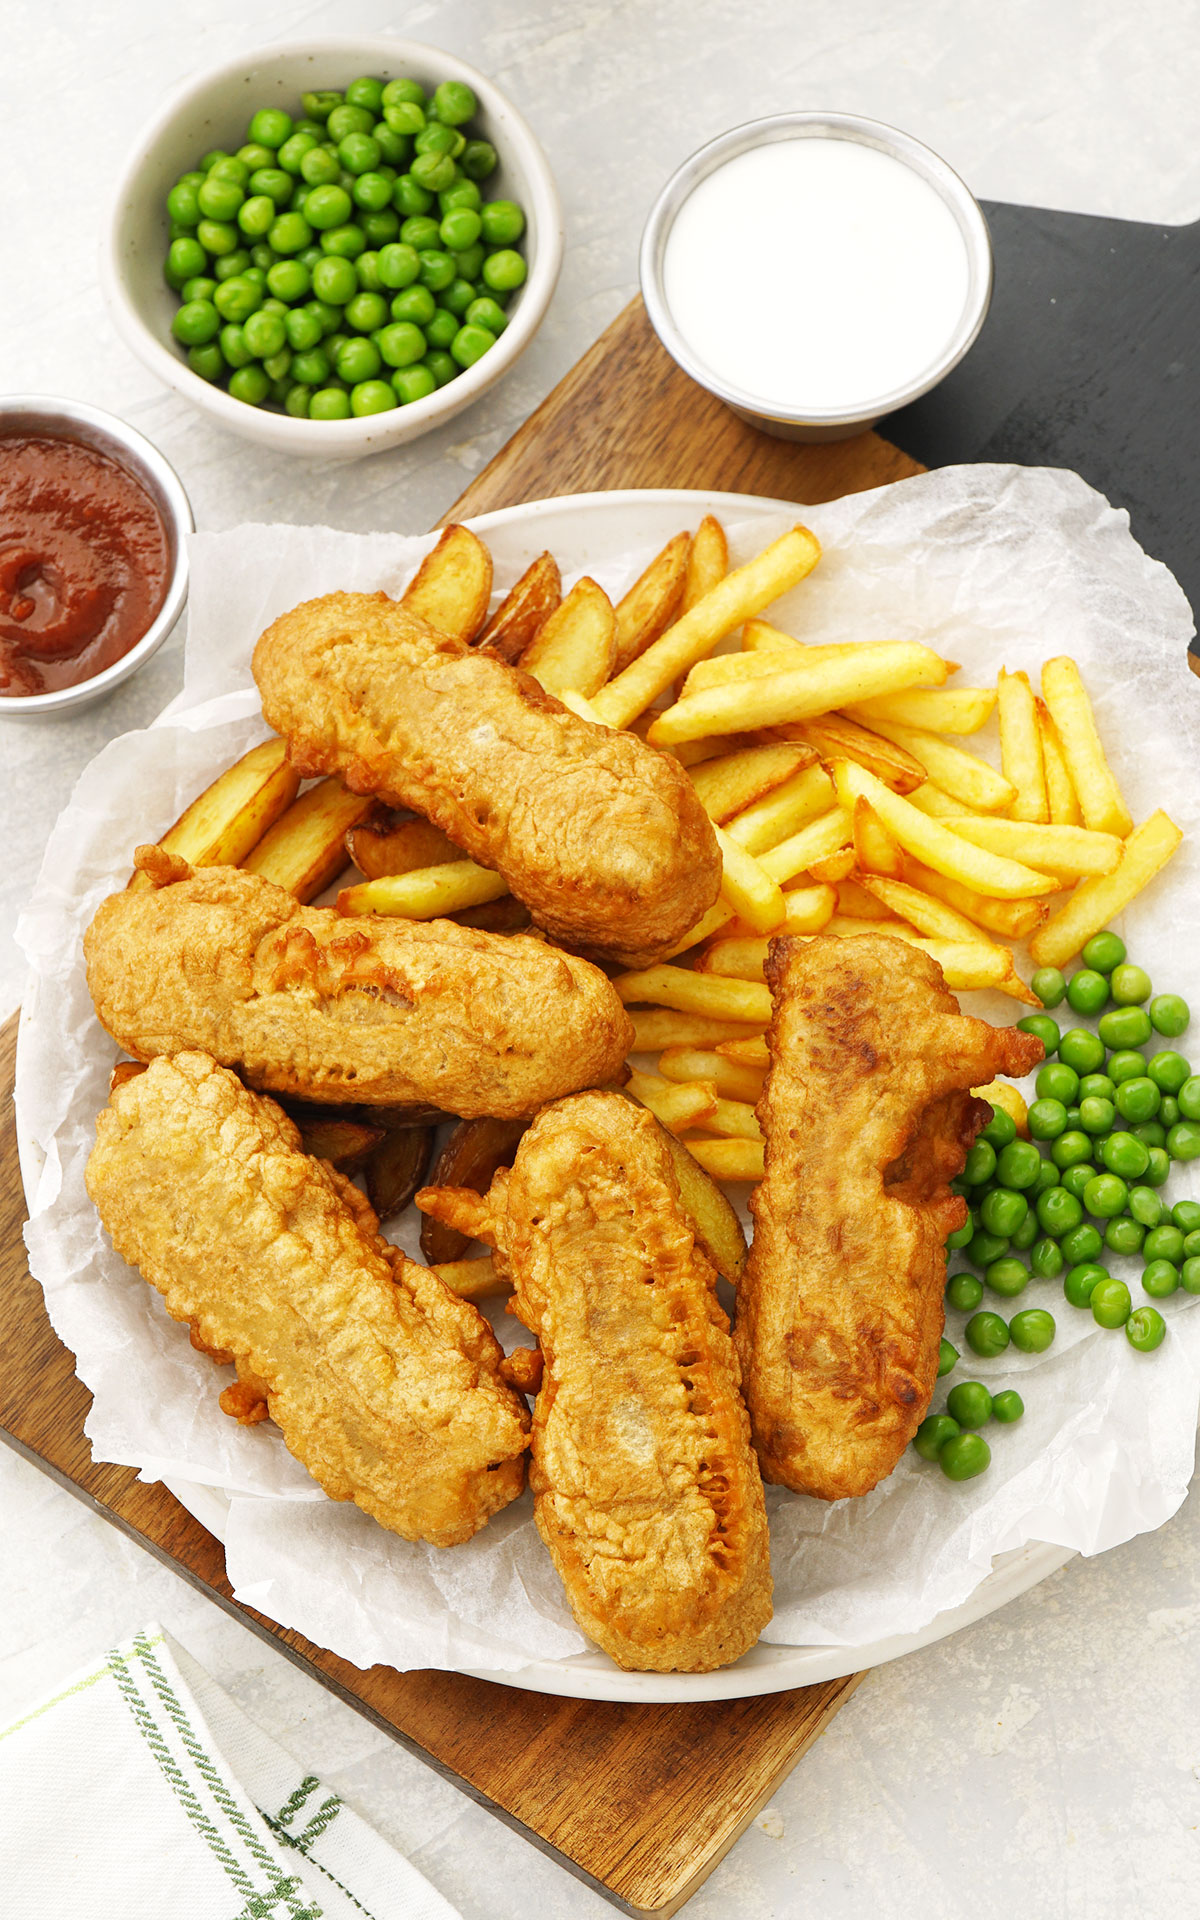 A white plate containing fried batter coated sausages, fries, and green peas.